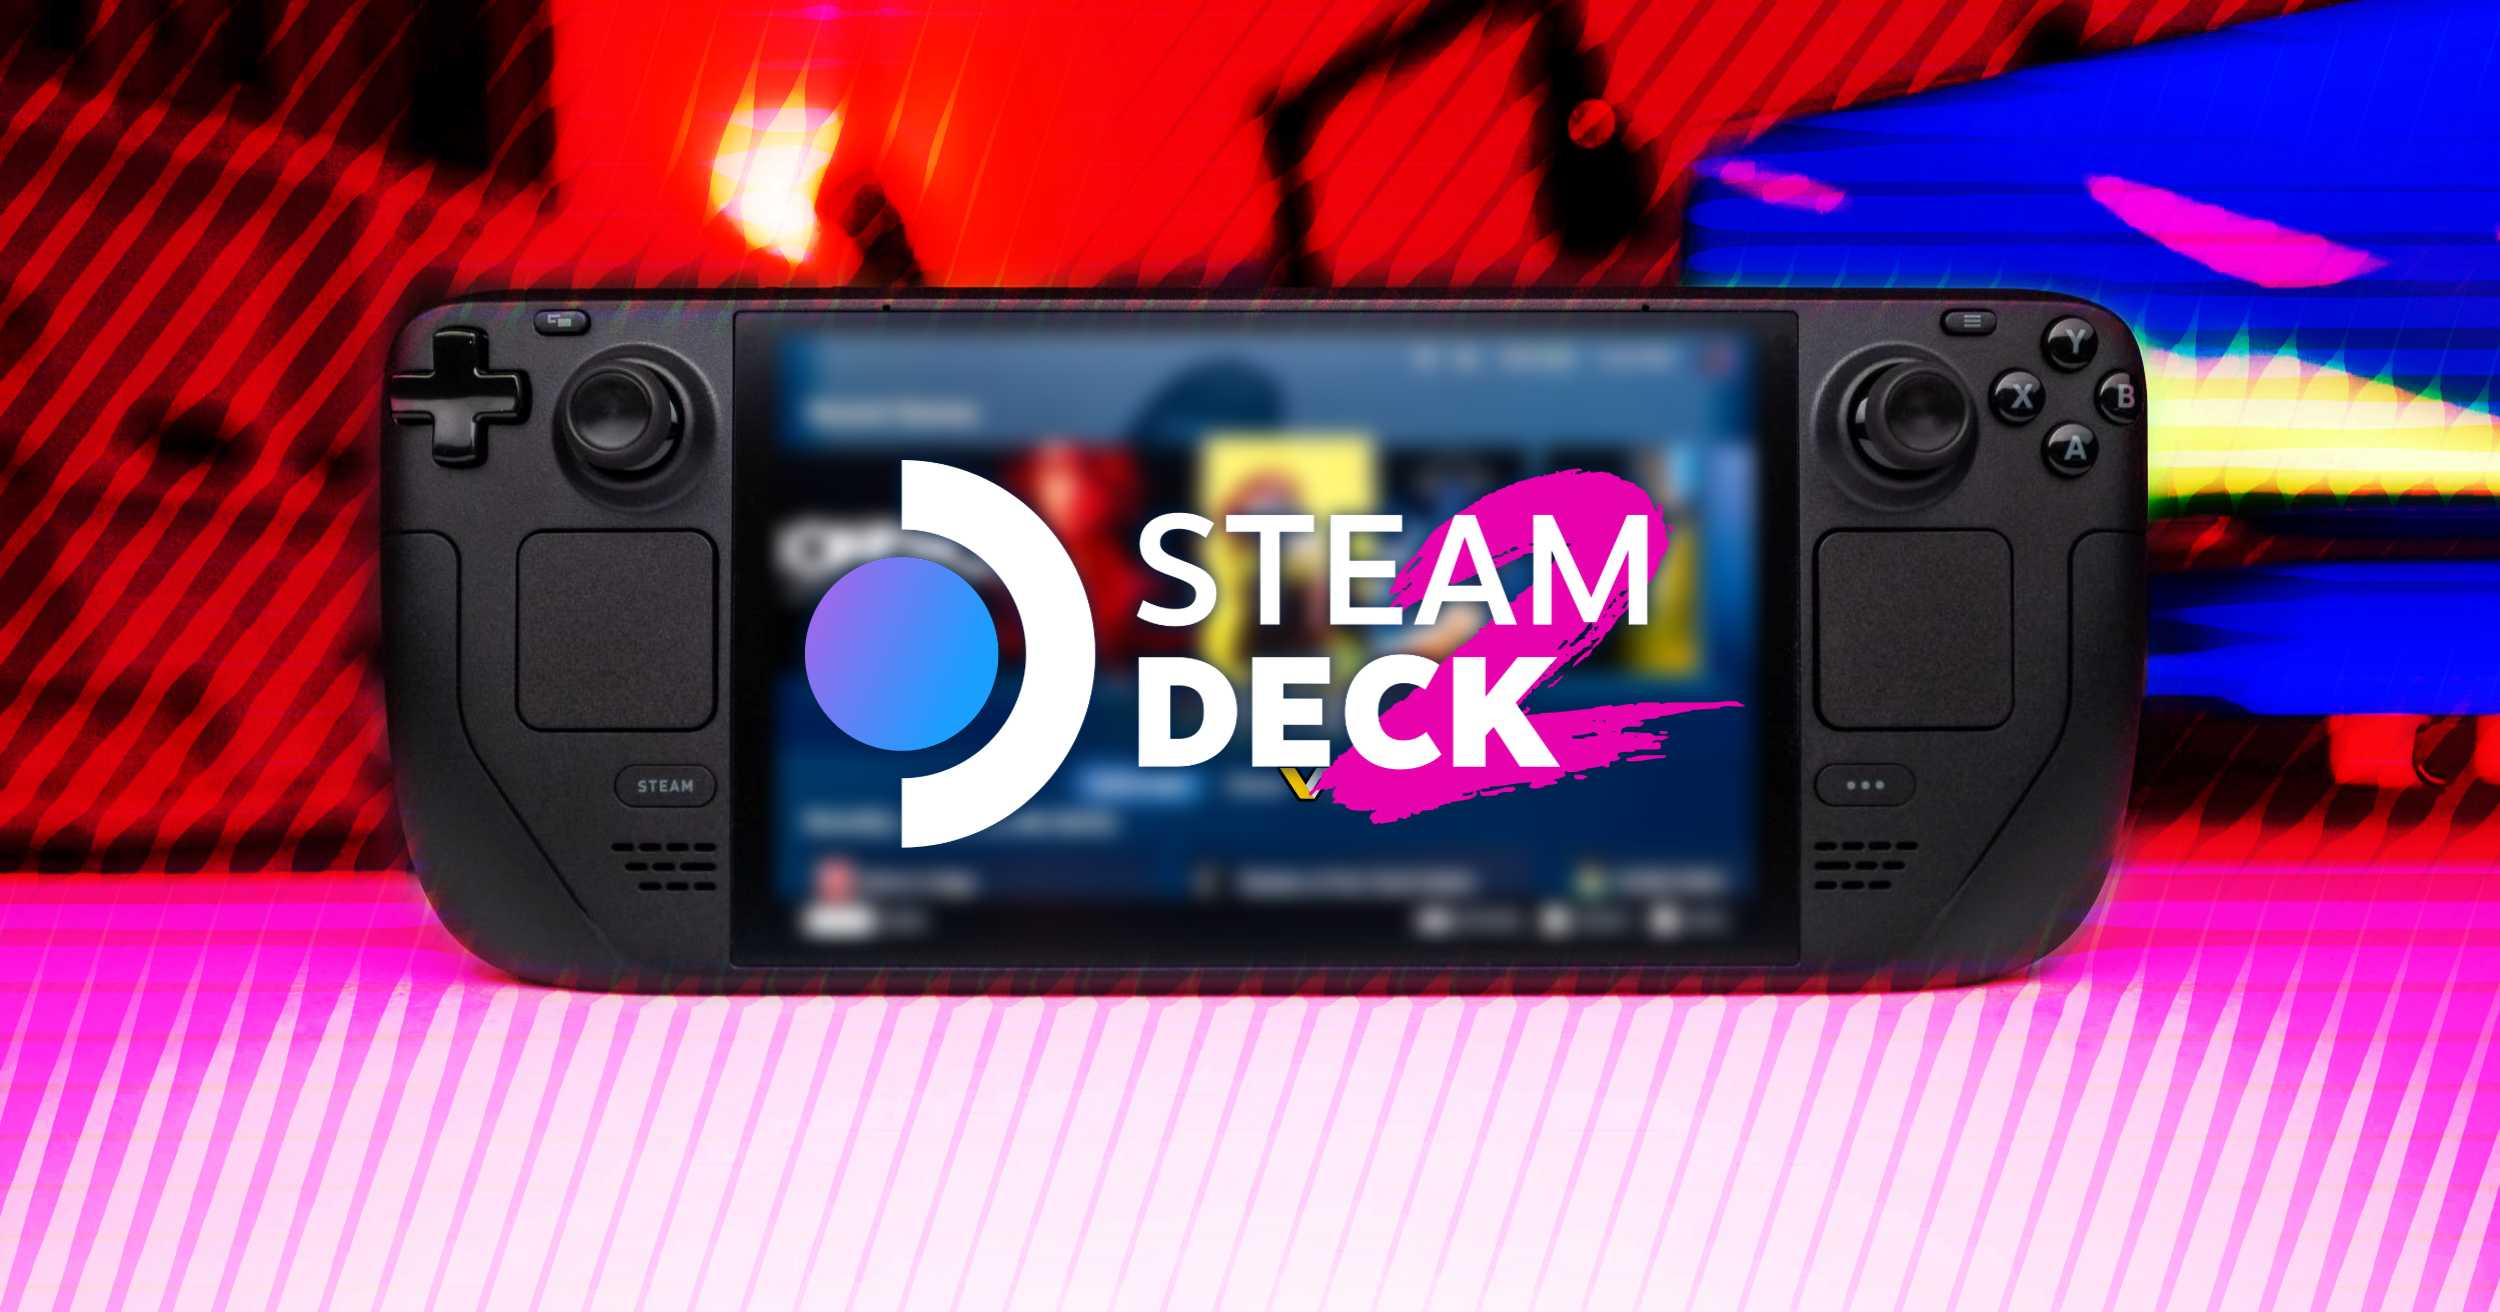 SteamDeck: buying a second, but OLED, $500 handheld to play